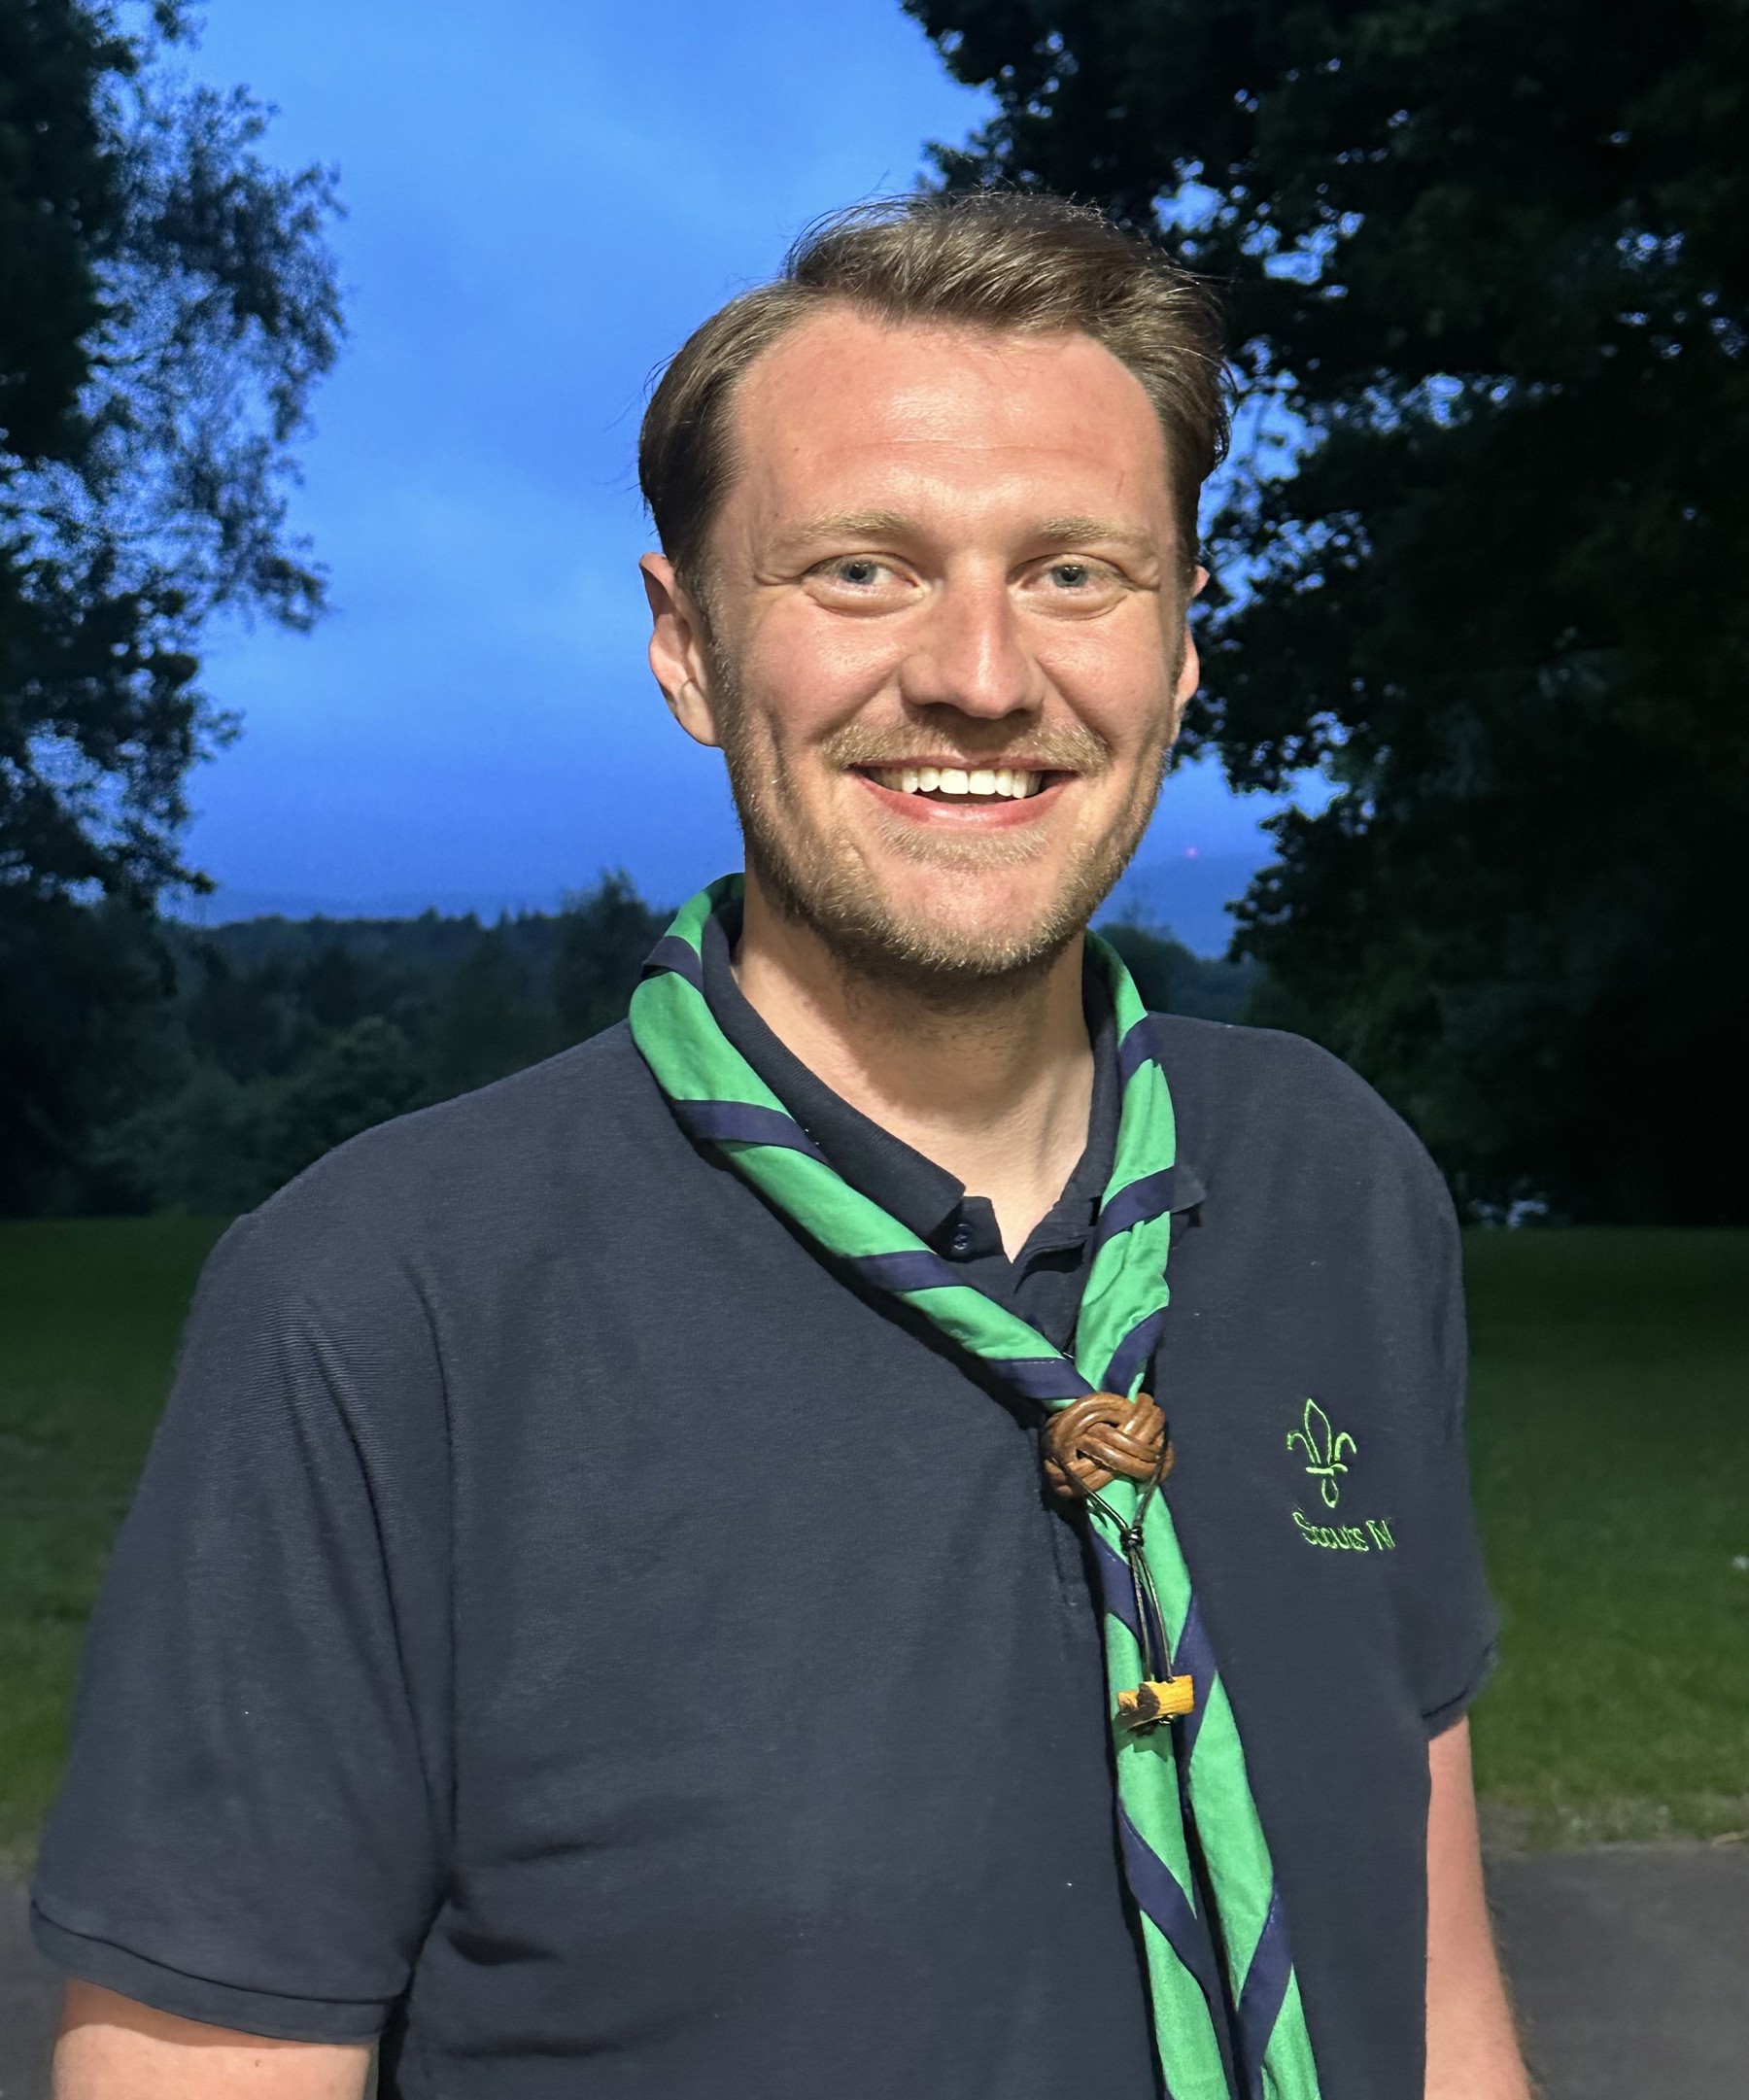 Stephen Bell stood outside with a green scout scarf around his neck